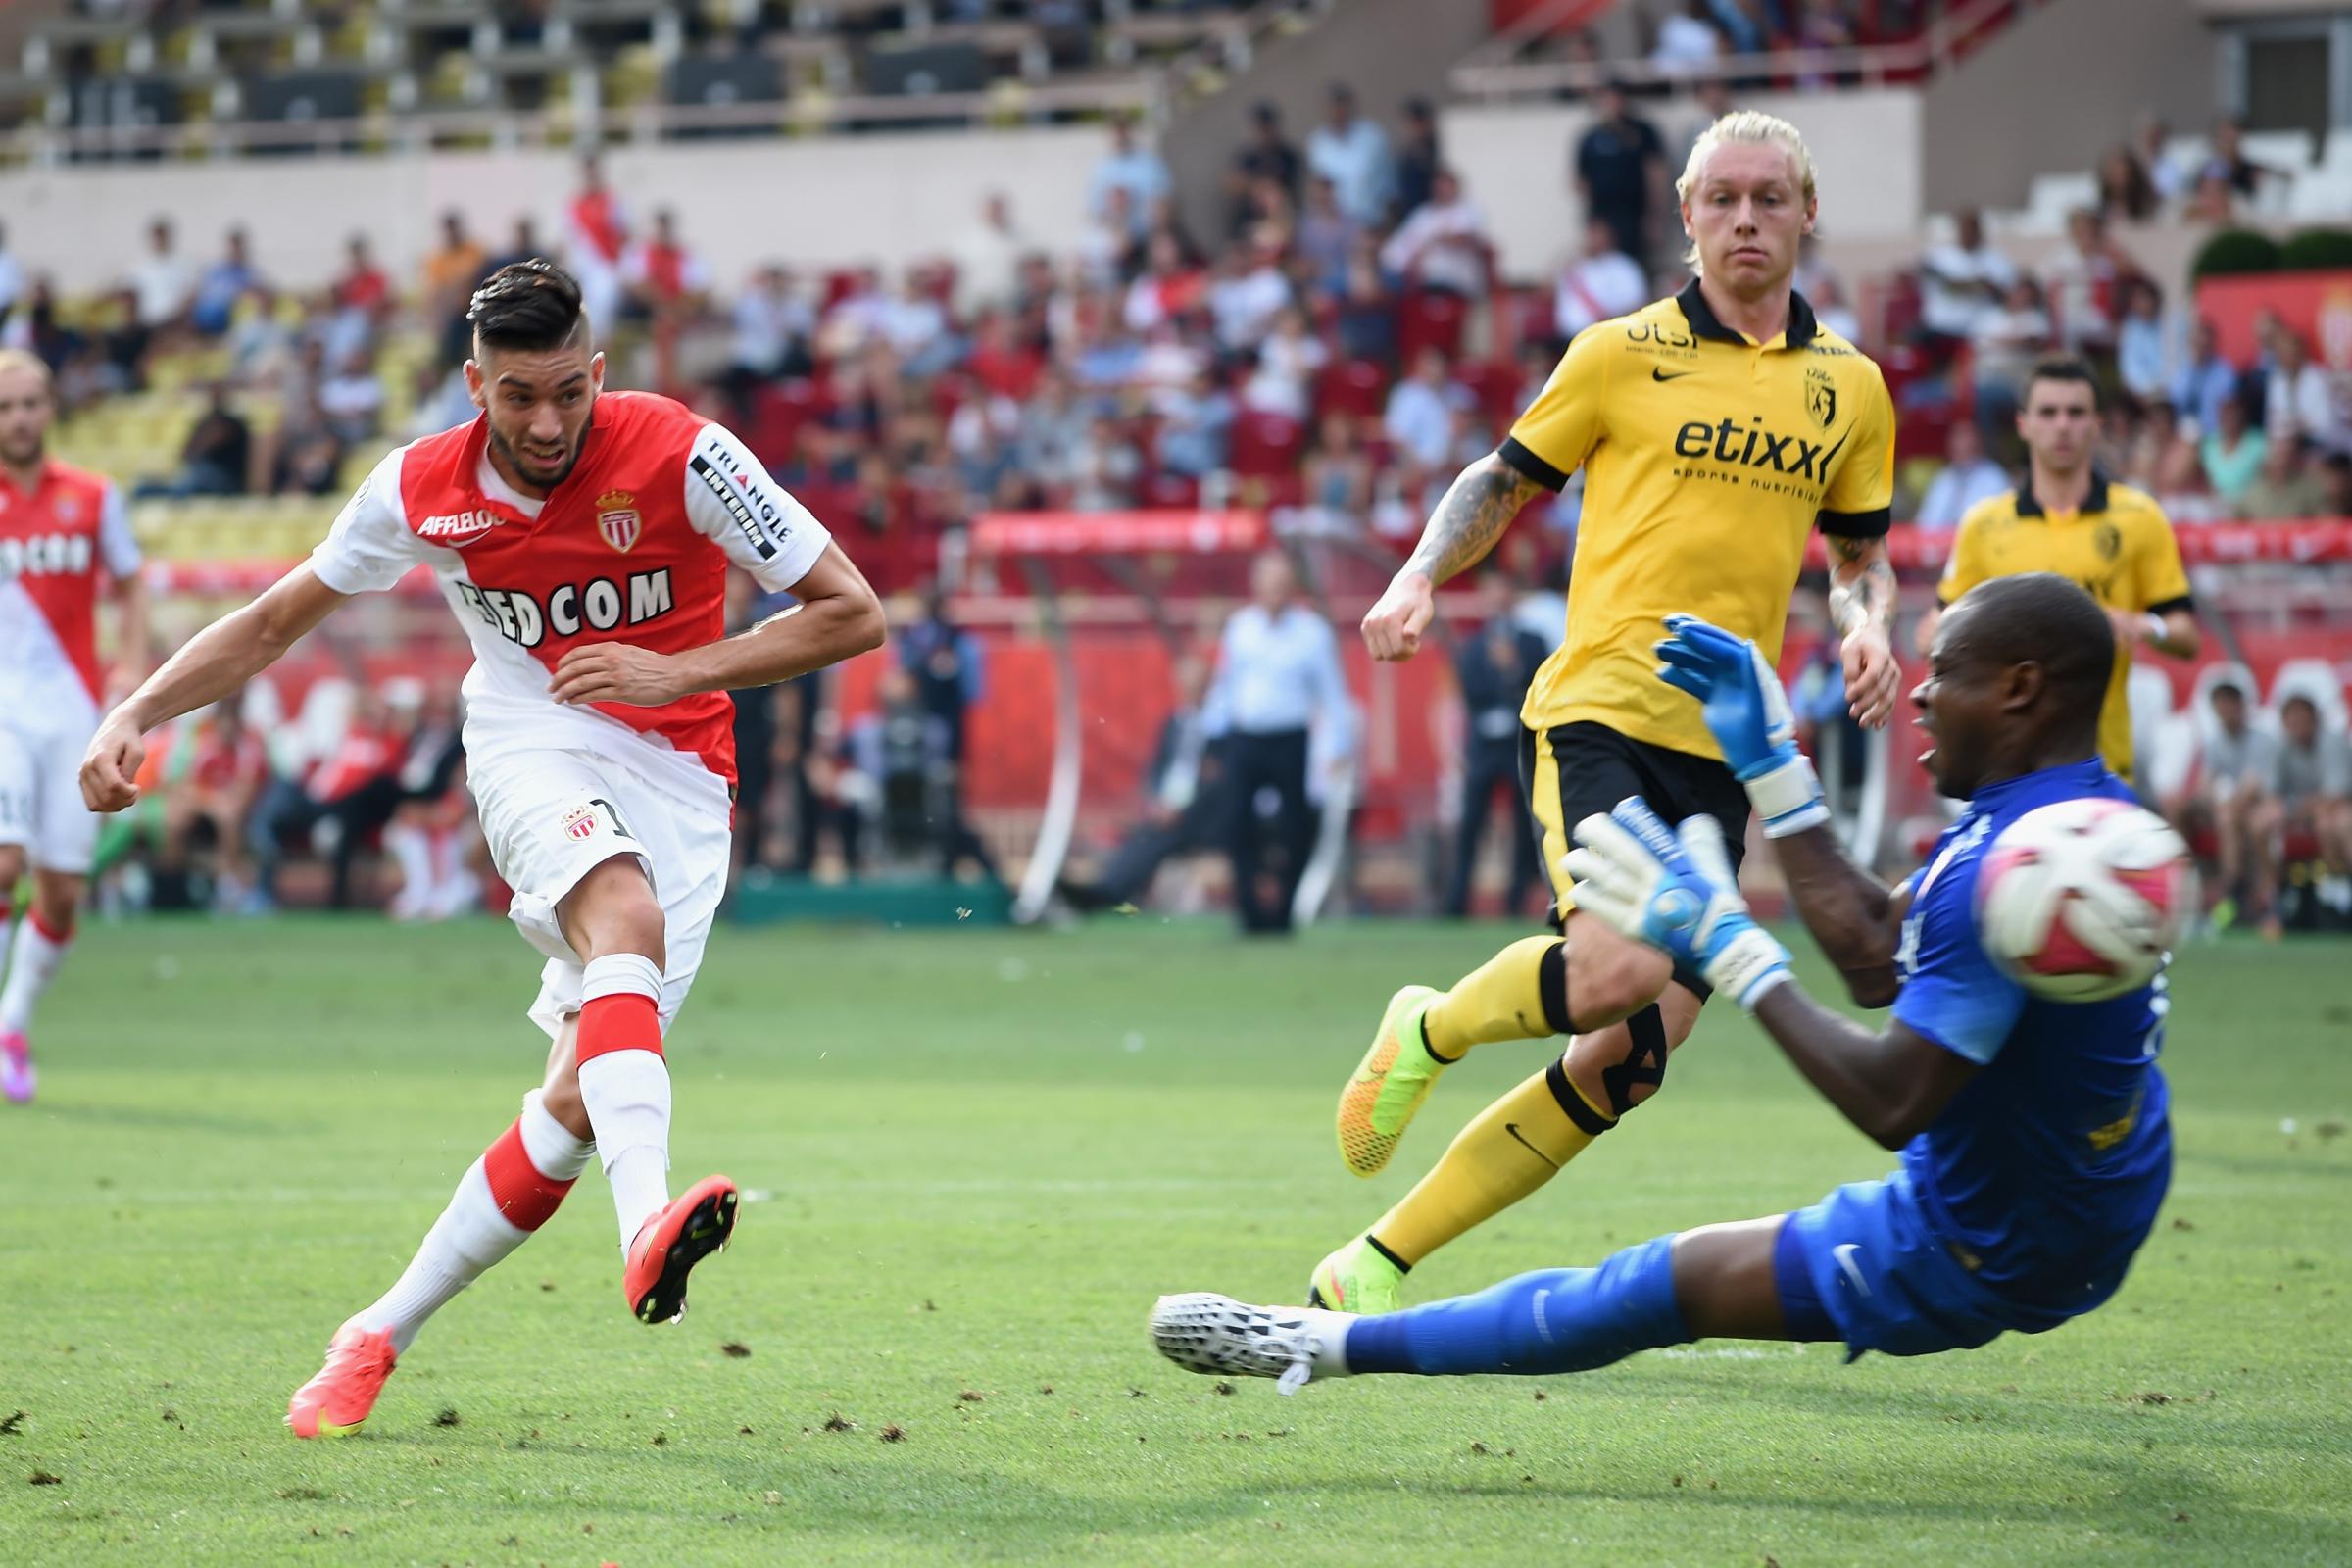 Yannick Ferreira Carrasco of Monaco shoots at goal during the French Ligue 1 match between AS Monaco FC and LOSC Lille at Louis II Stadium on Aug. 30, 2014 in Monaco,